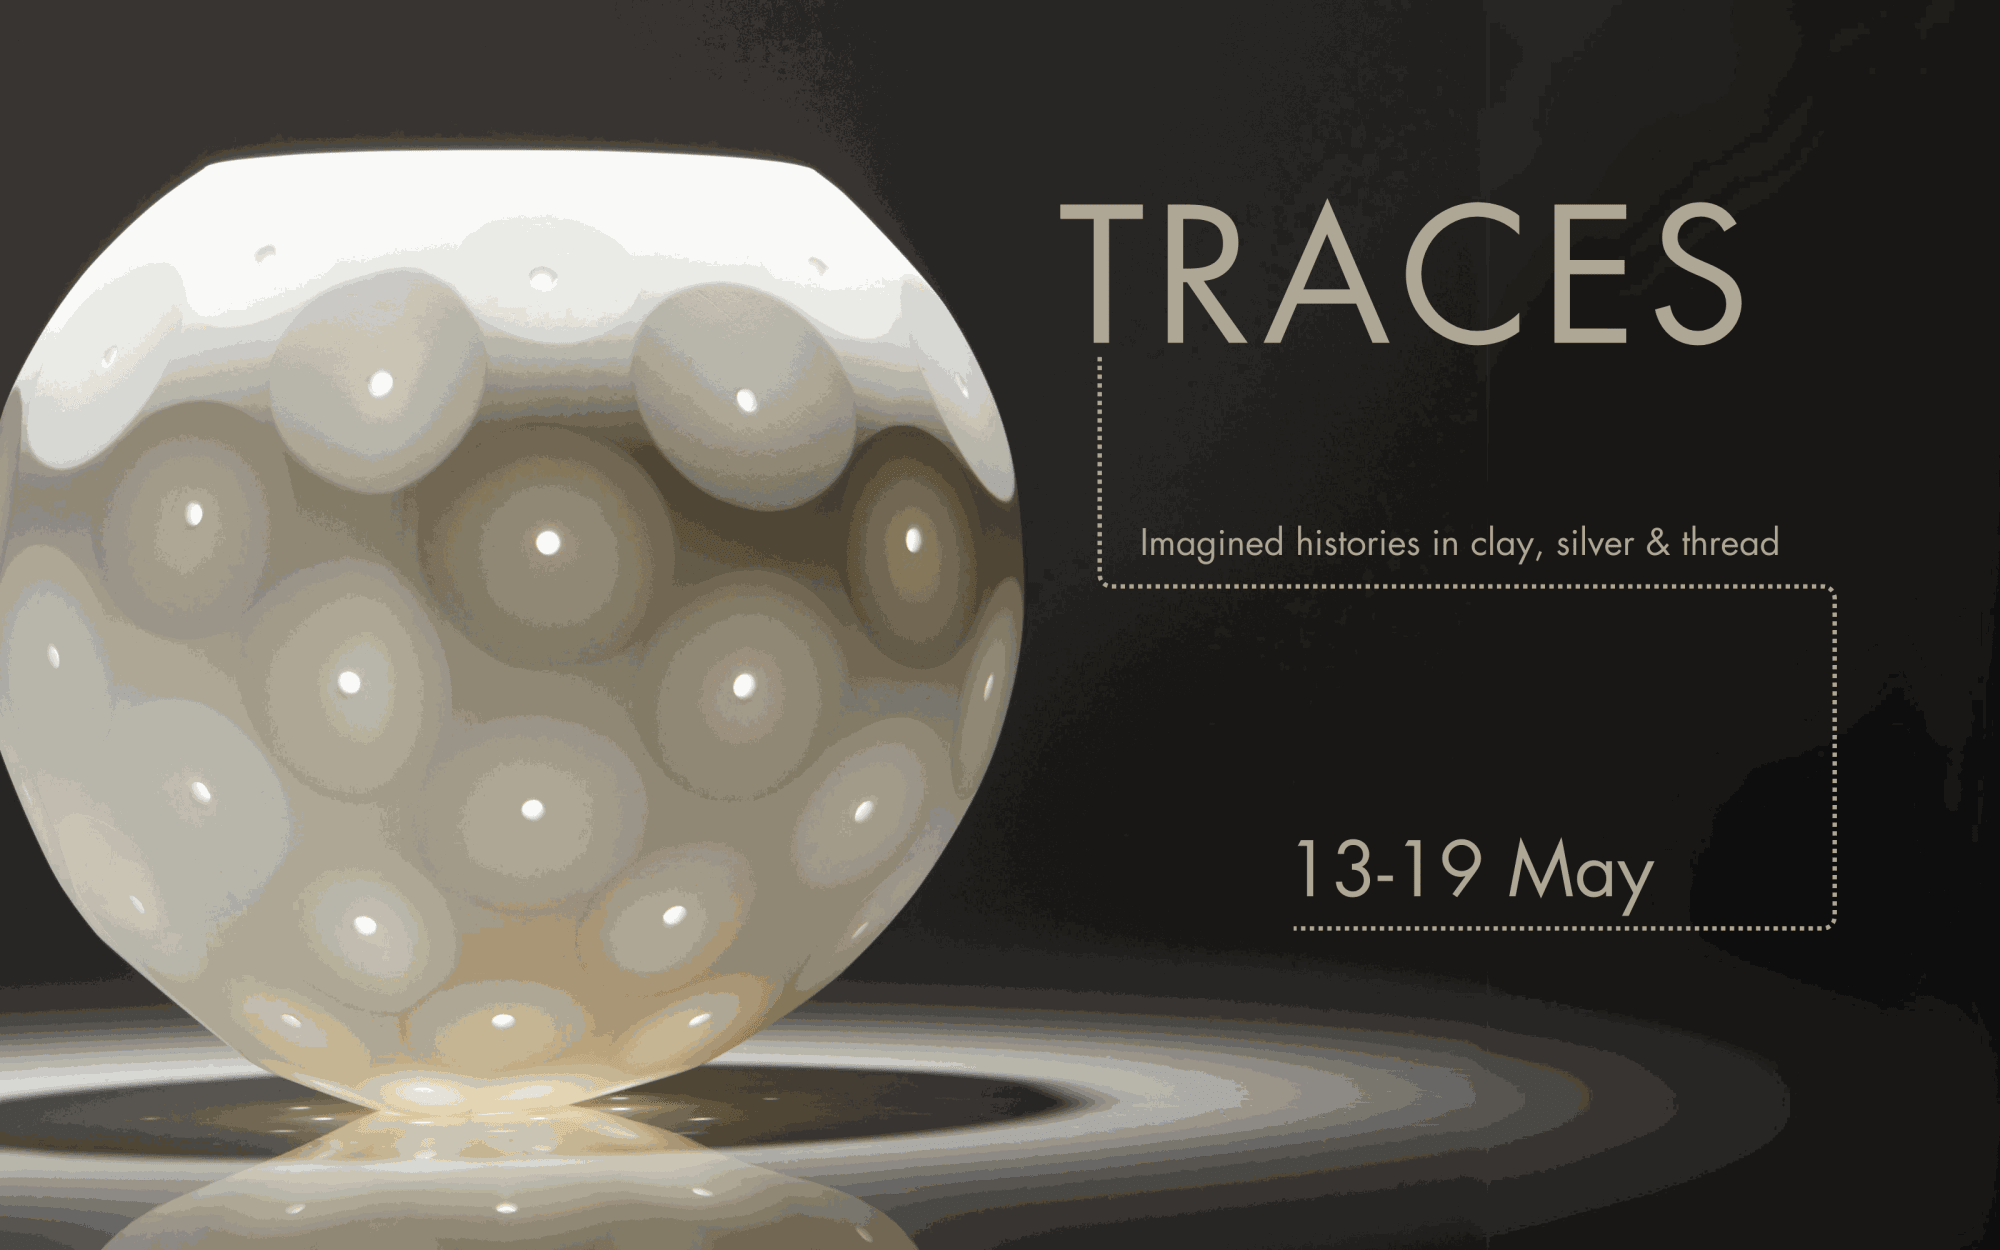 TRACES | LONDON CRAFT WEEK: IMAGINED HISTORIES IN CLAY, SILVER & THREAD